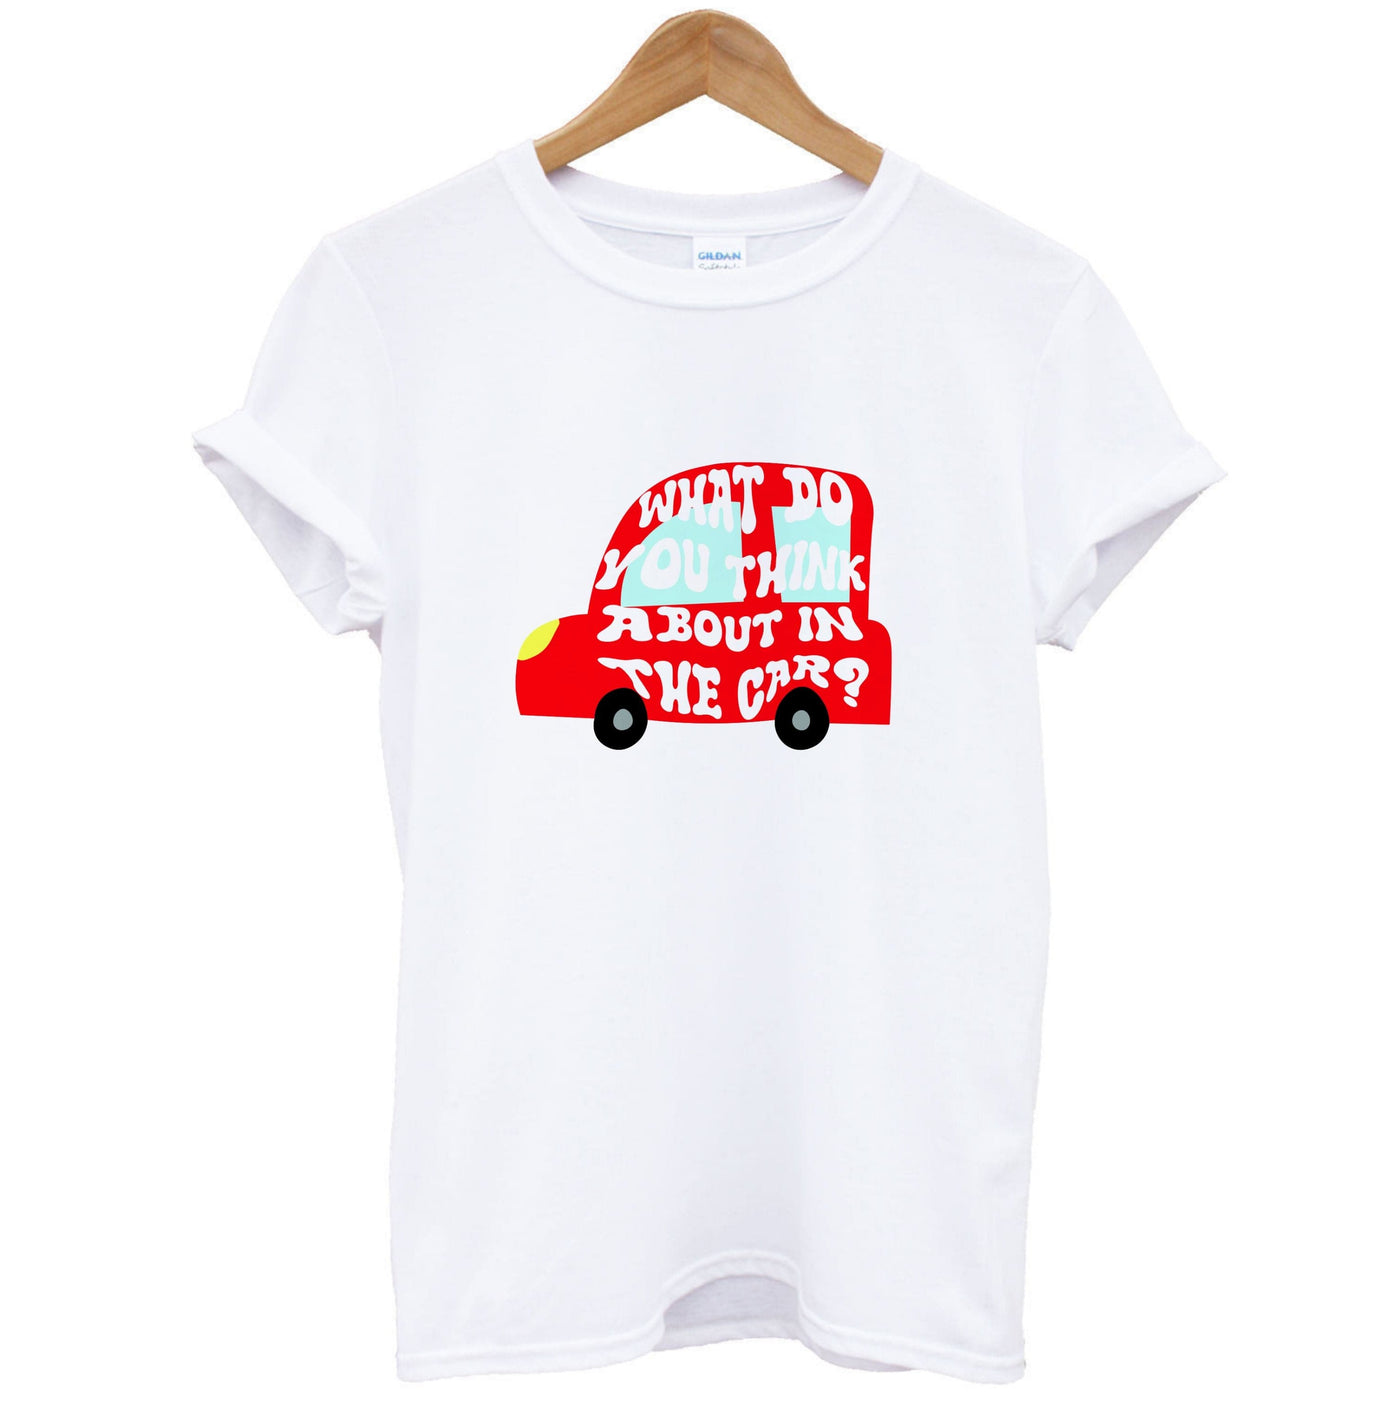 What Do You Think About In The Car? - Declan Mckenna T-Shirt